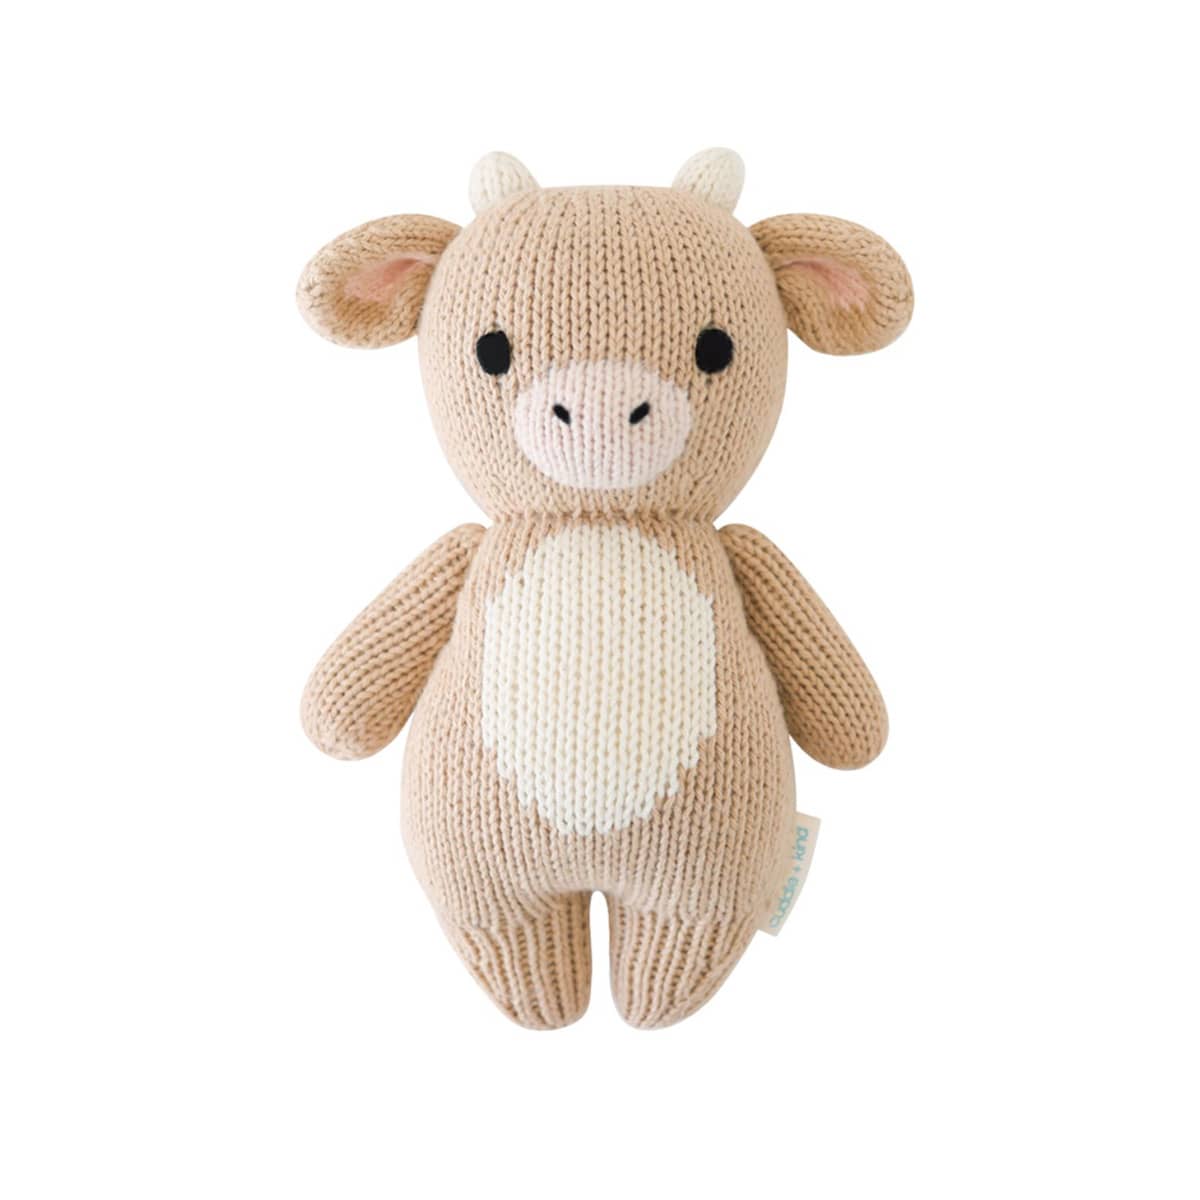 Cuddle + Kind Hand-Knit Doll - Baby Cow (jersey)